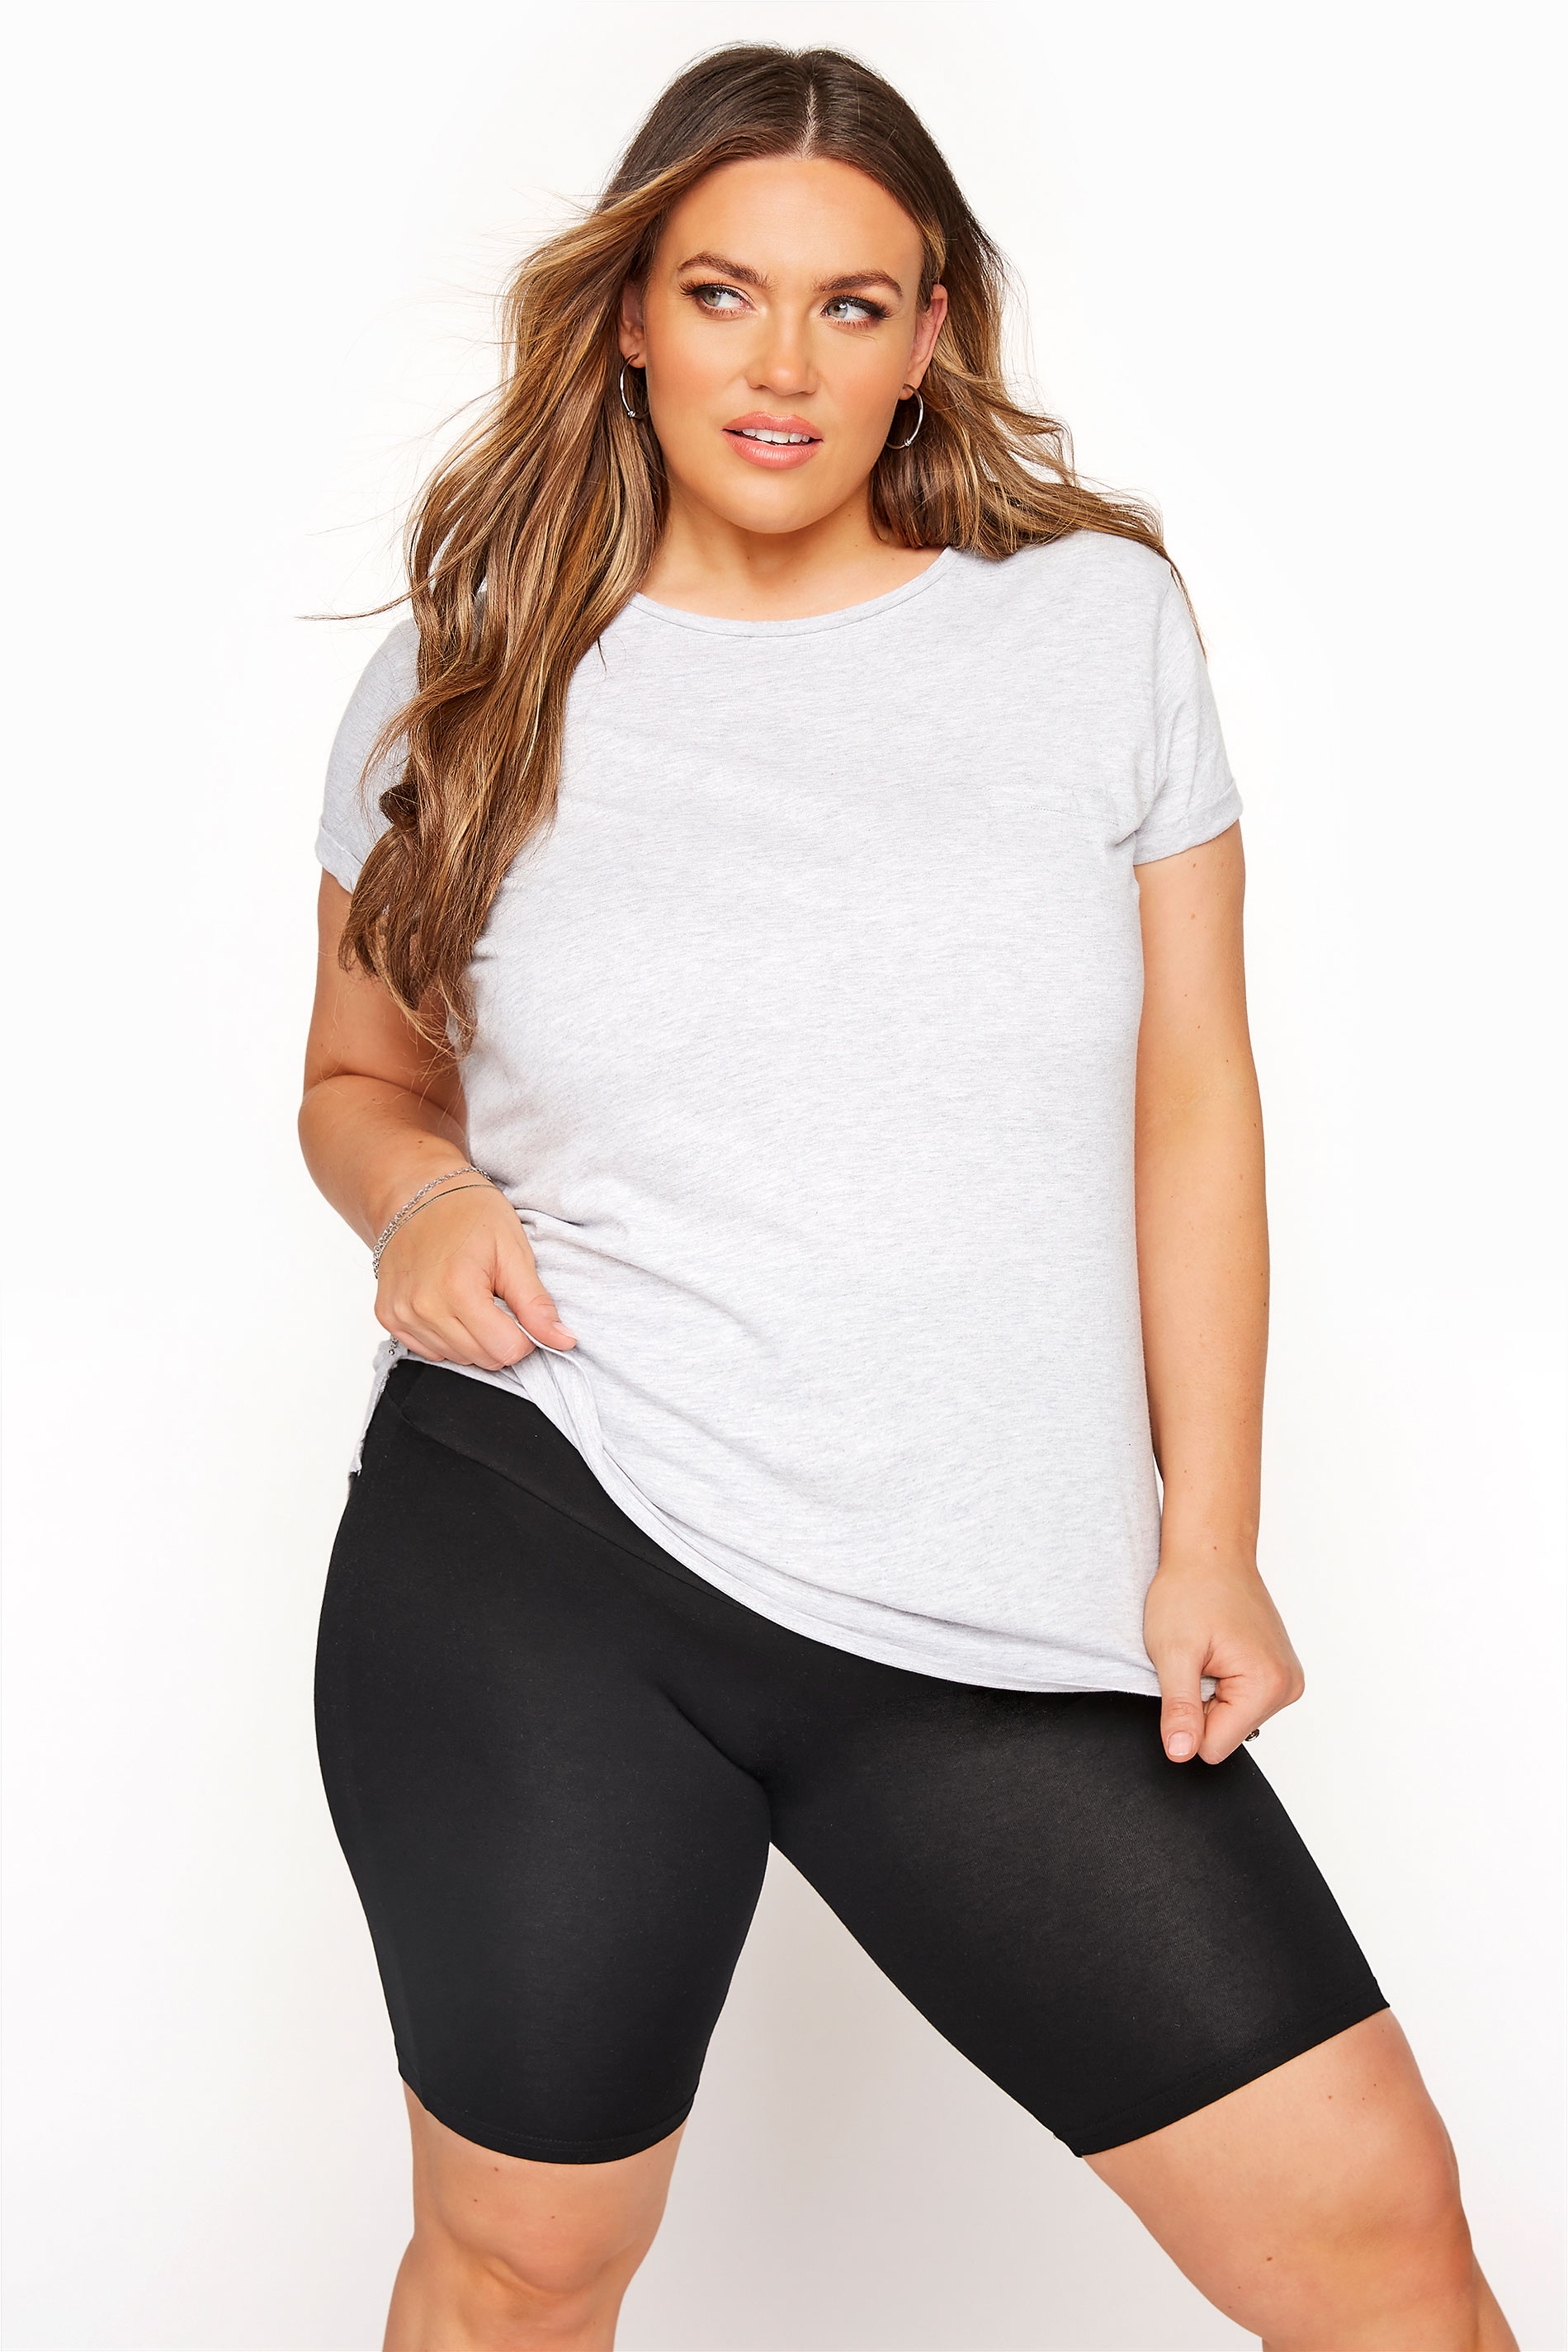 Plus Size Black TUMMY CONTROL Soft Touch Cycling Shorts | Yours Clothing